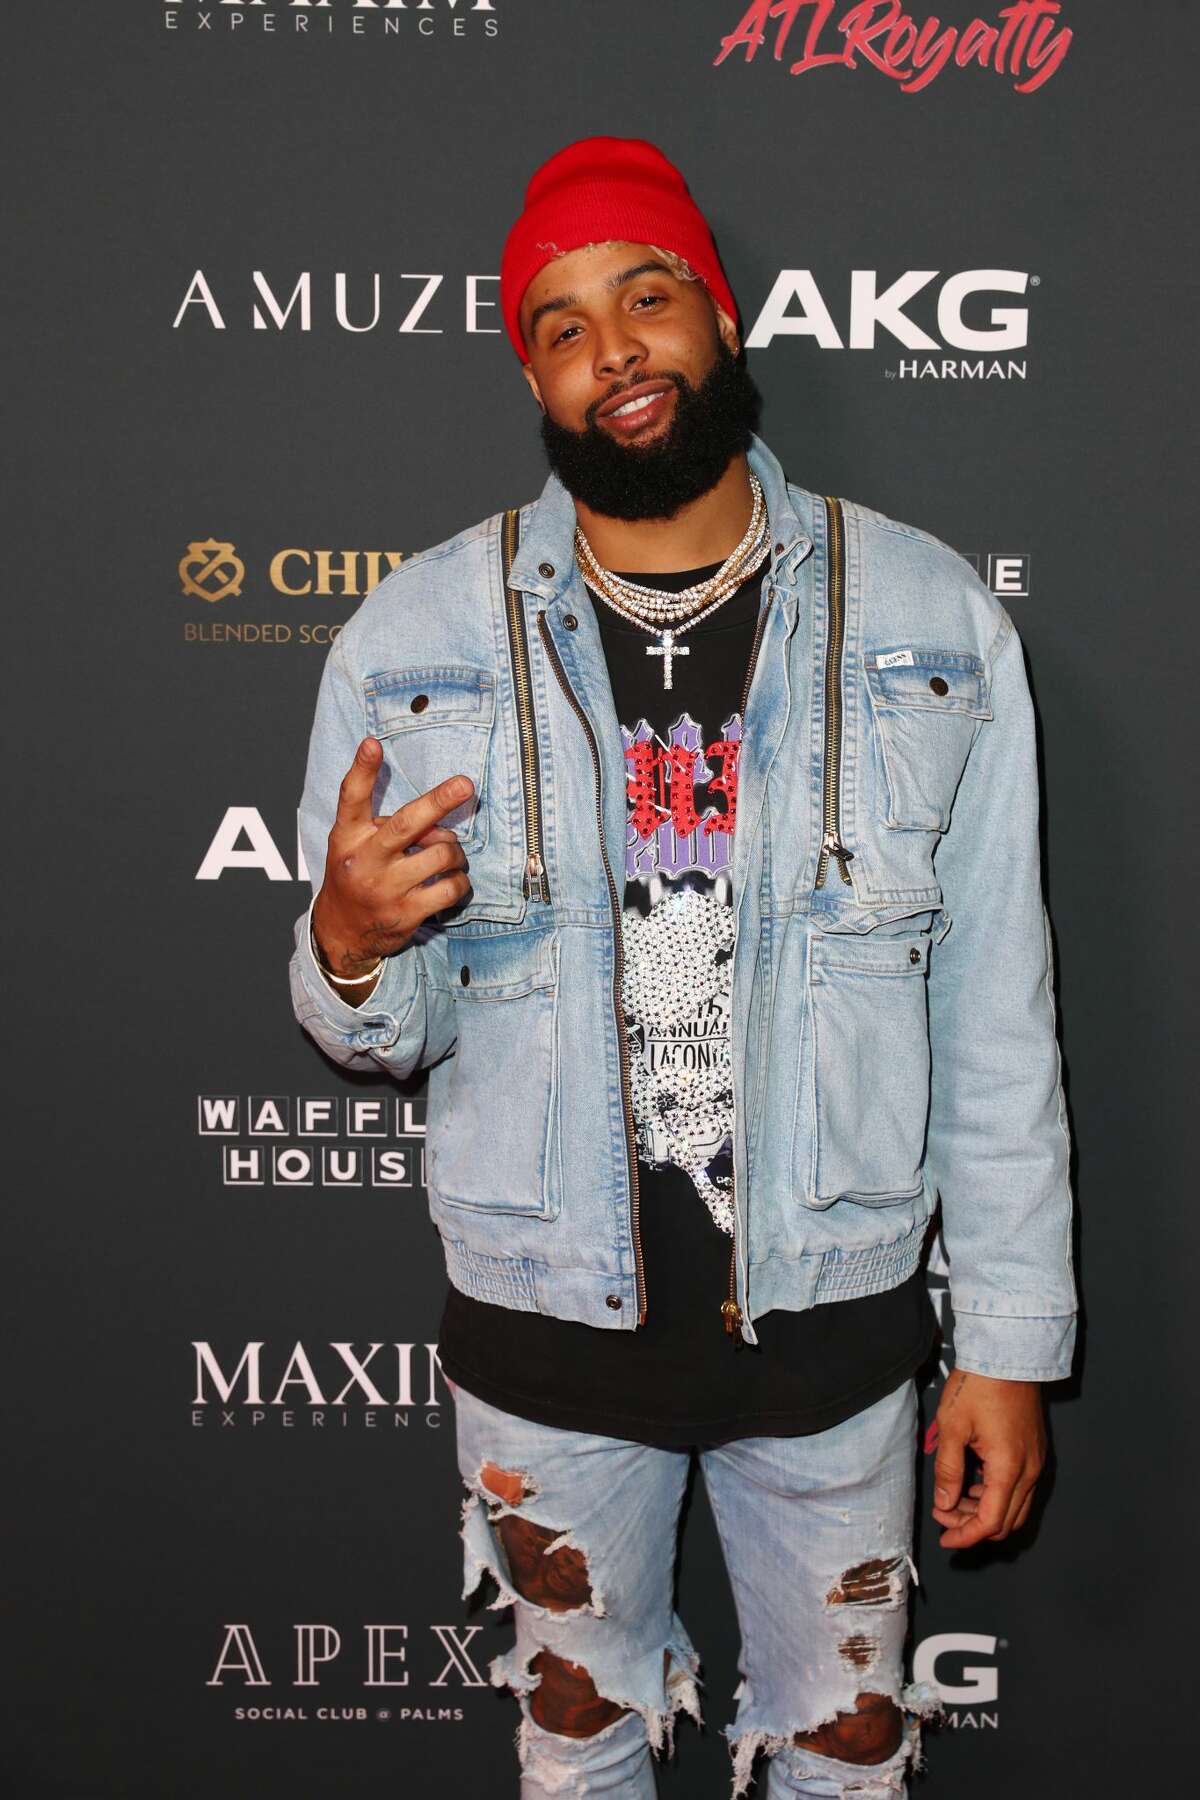 ATLANTA, GEORGIA - FEBRUARY 02: Odell Beckham Jr. attends The Maxim Big Game Experience at The Fairmont on February 02, 2019 in Atlanta, Georgia. (Photo by Joe Scarnici/Getty Images for Maxim)